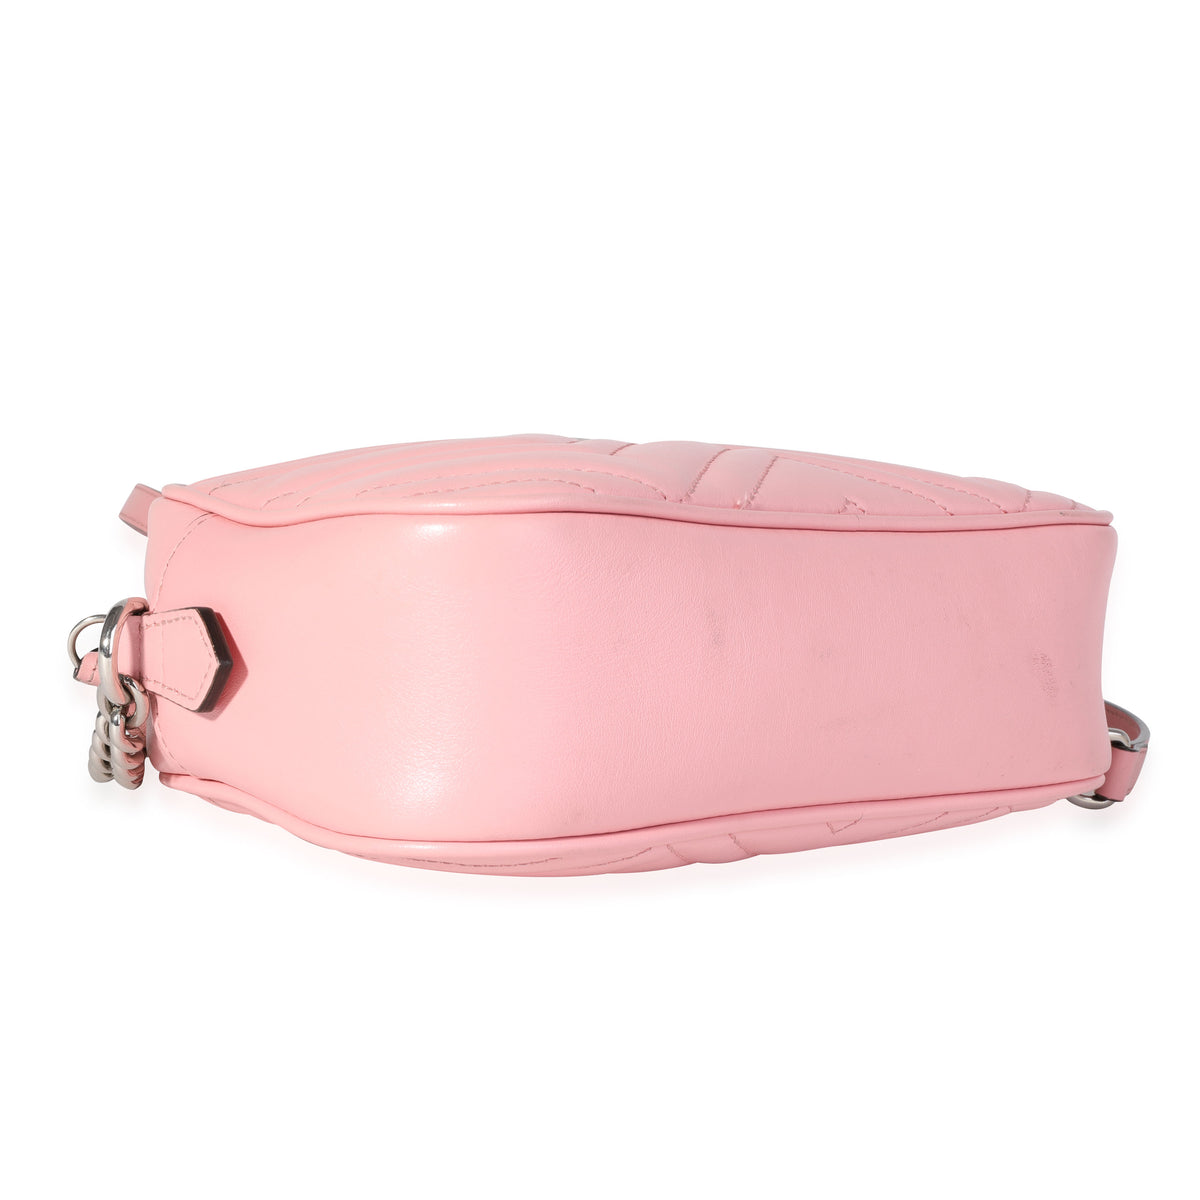 Gucci Pink Matelassé Leather Small Marmont Bag